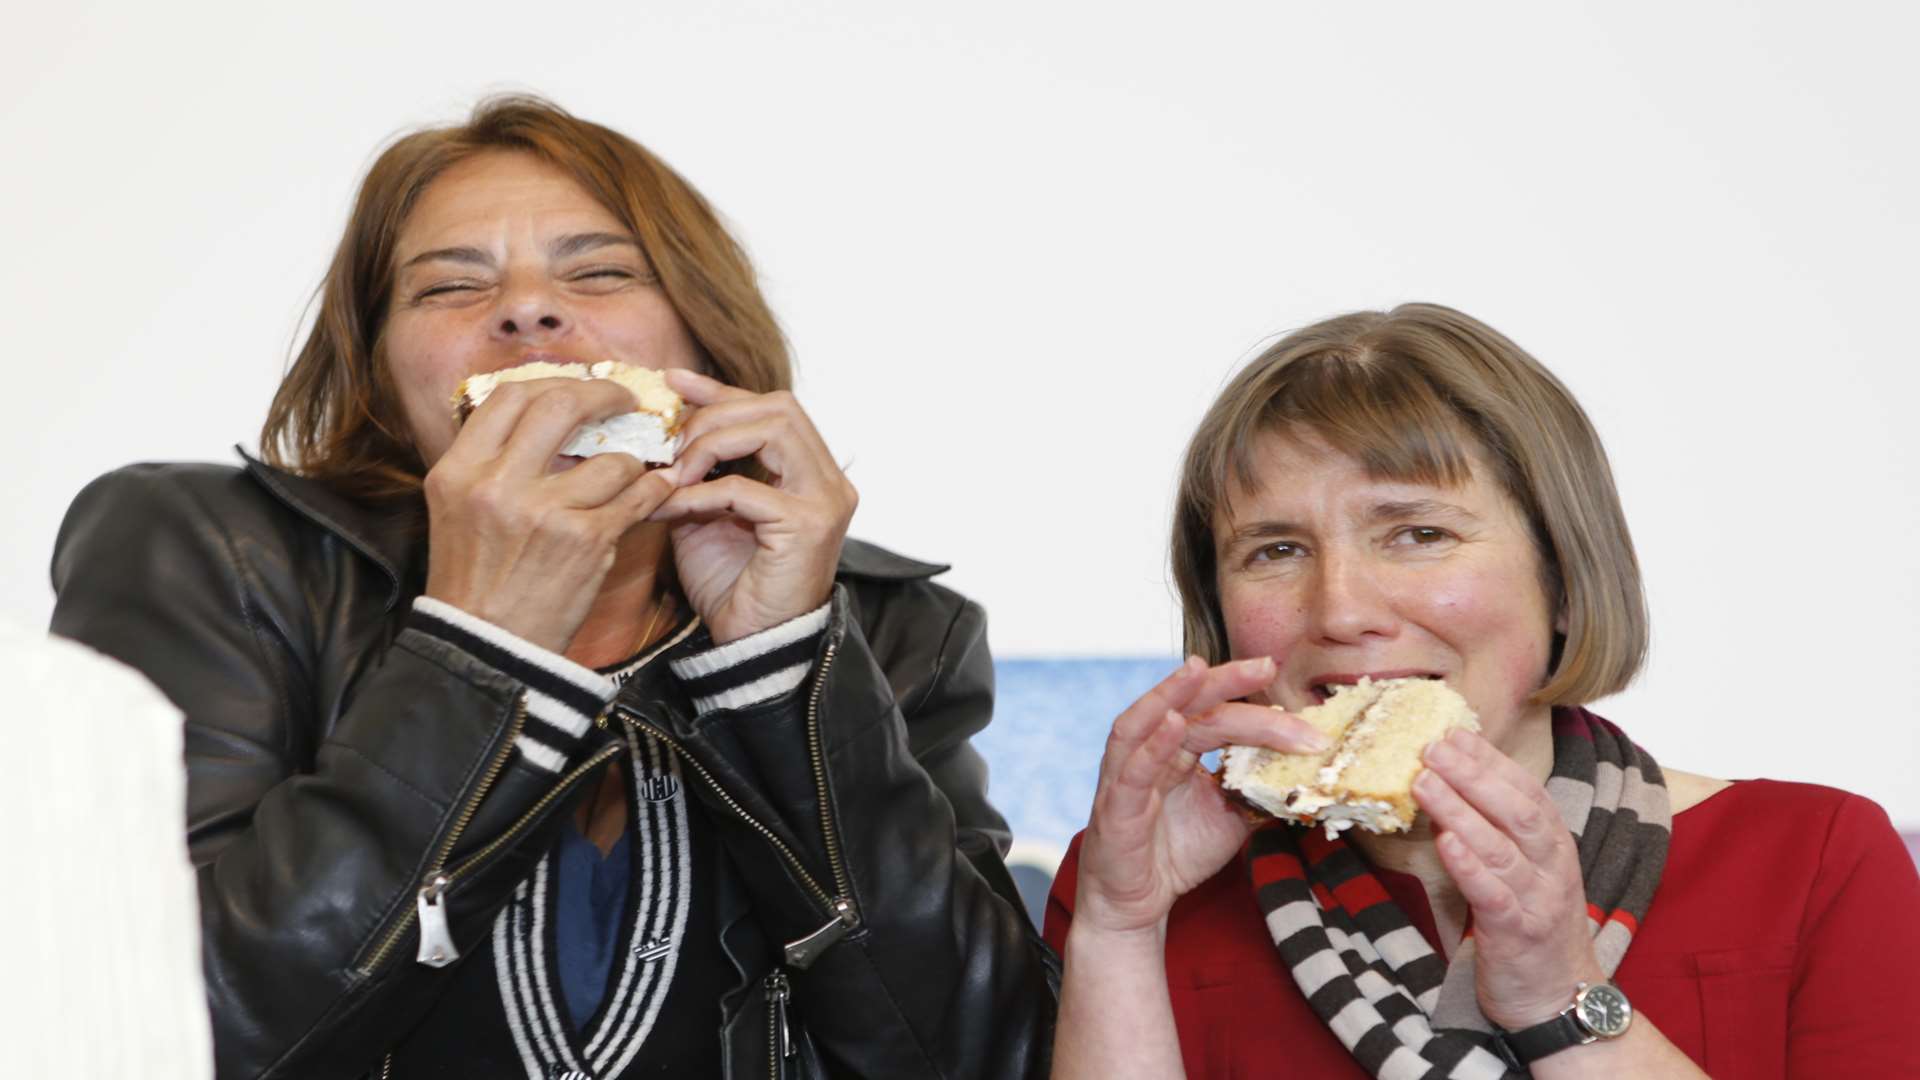 Tracey Emin and Victoria Pomery enjoy the cake together.